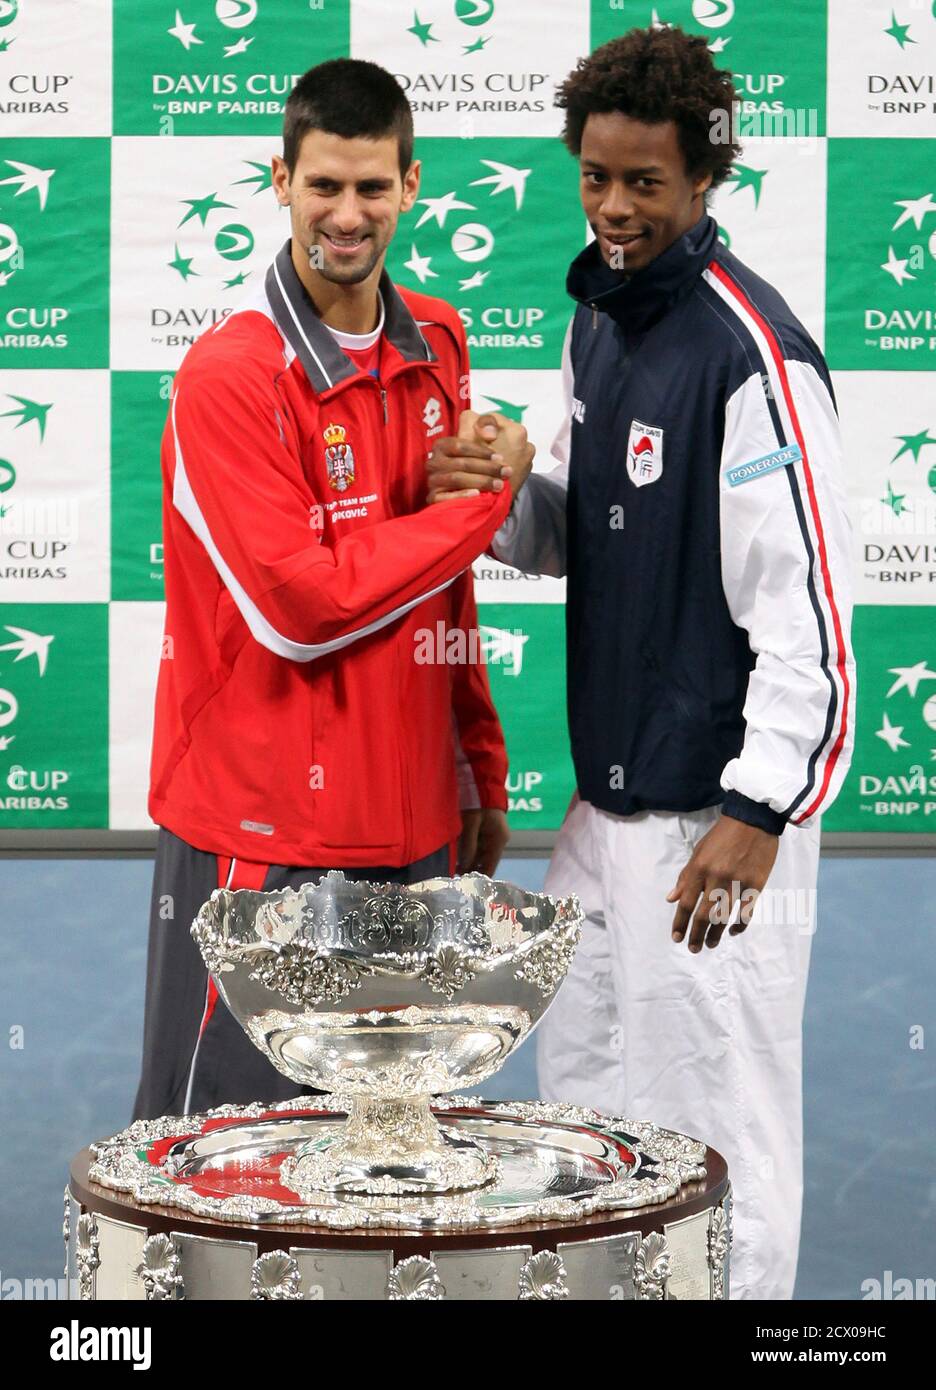 Serbia's Novak Djokovic (L) and France's Gael Monfils pose with the Davis Cup trophy after the official draw at Belgrade Arena in Belgrade December 2, 2010. Serbia and France will play their Davis Cup final tennis match from December 3-5 in Belgrade. REUTERS/Marko Djurica (SERBIA - Tags: SPORT TENNIS) Stock Photo